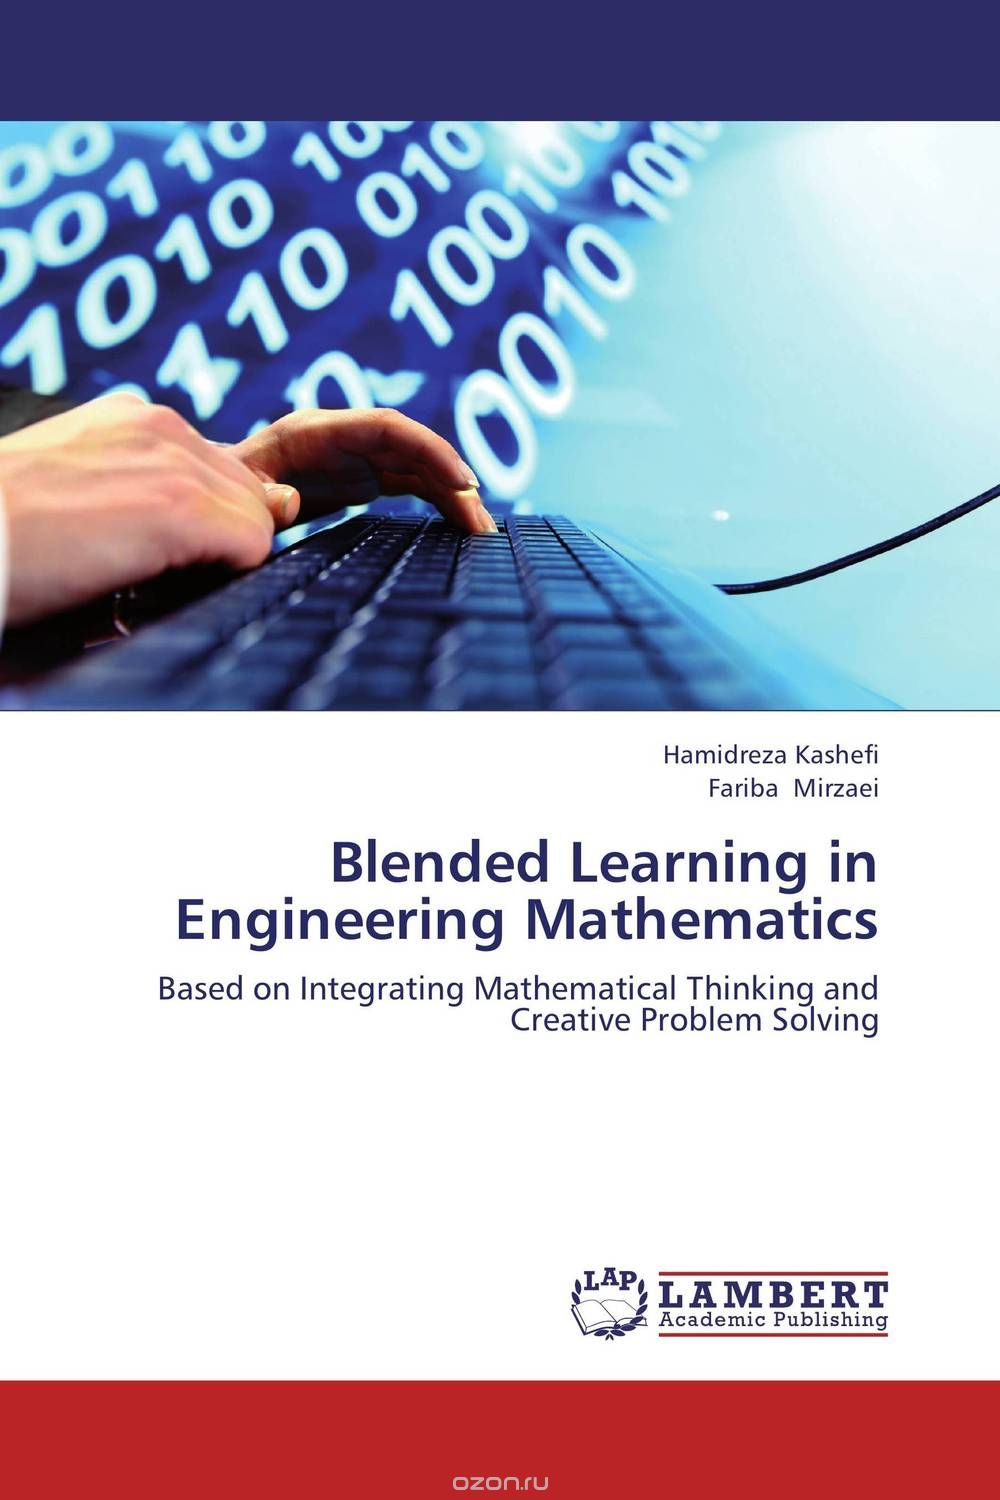 Blended Learning in Engineering Mathematics